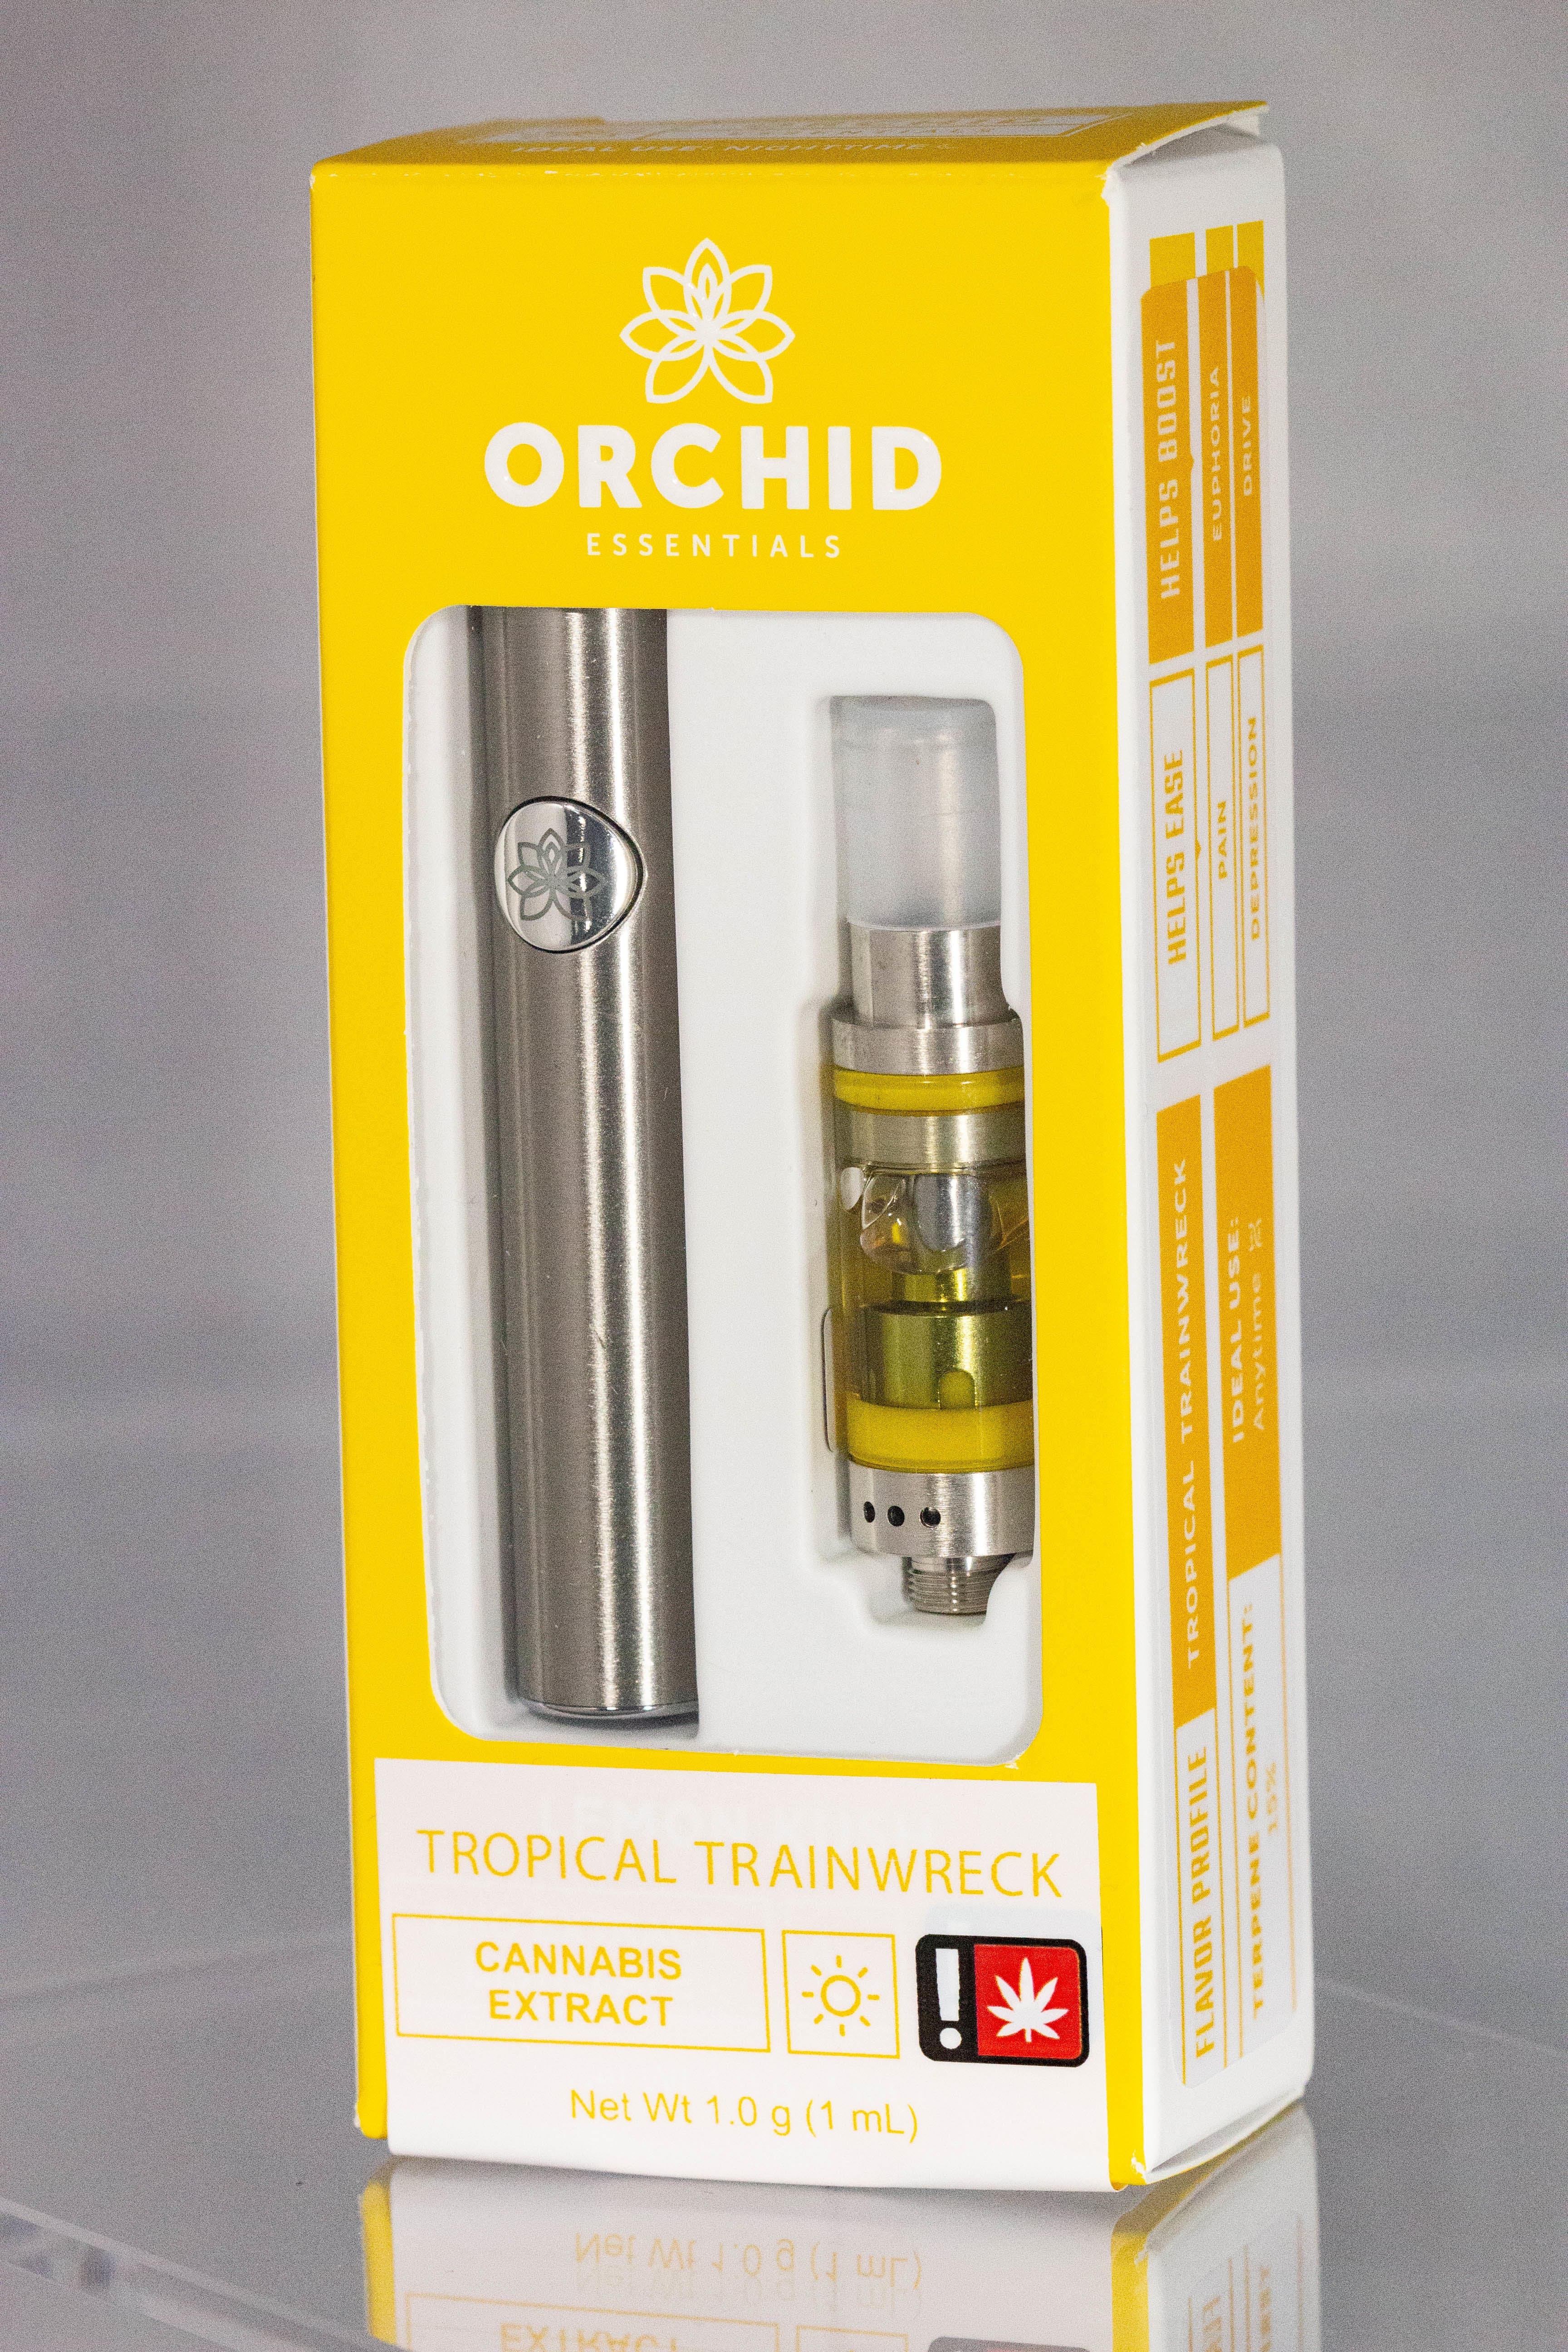 wax-tropical-trainwreck-1g-vape-kit-by-orchid-essentials